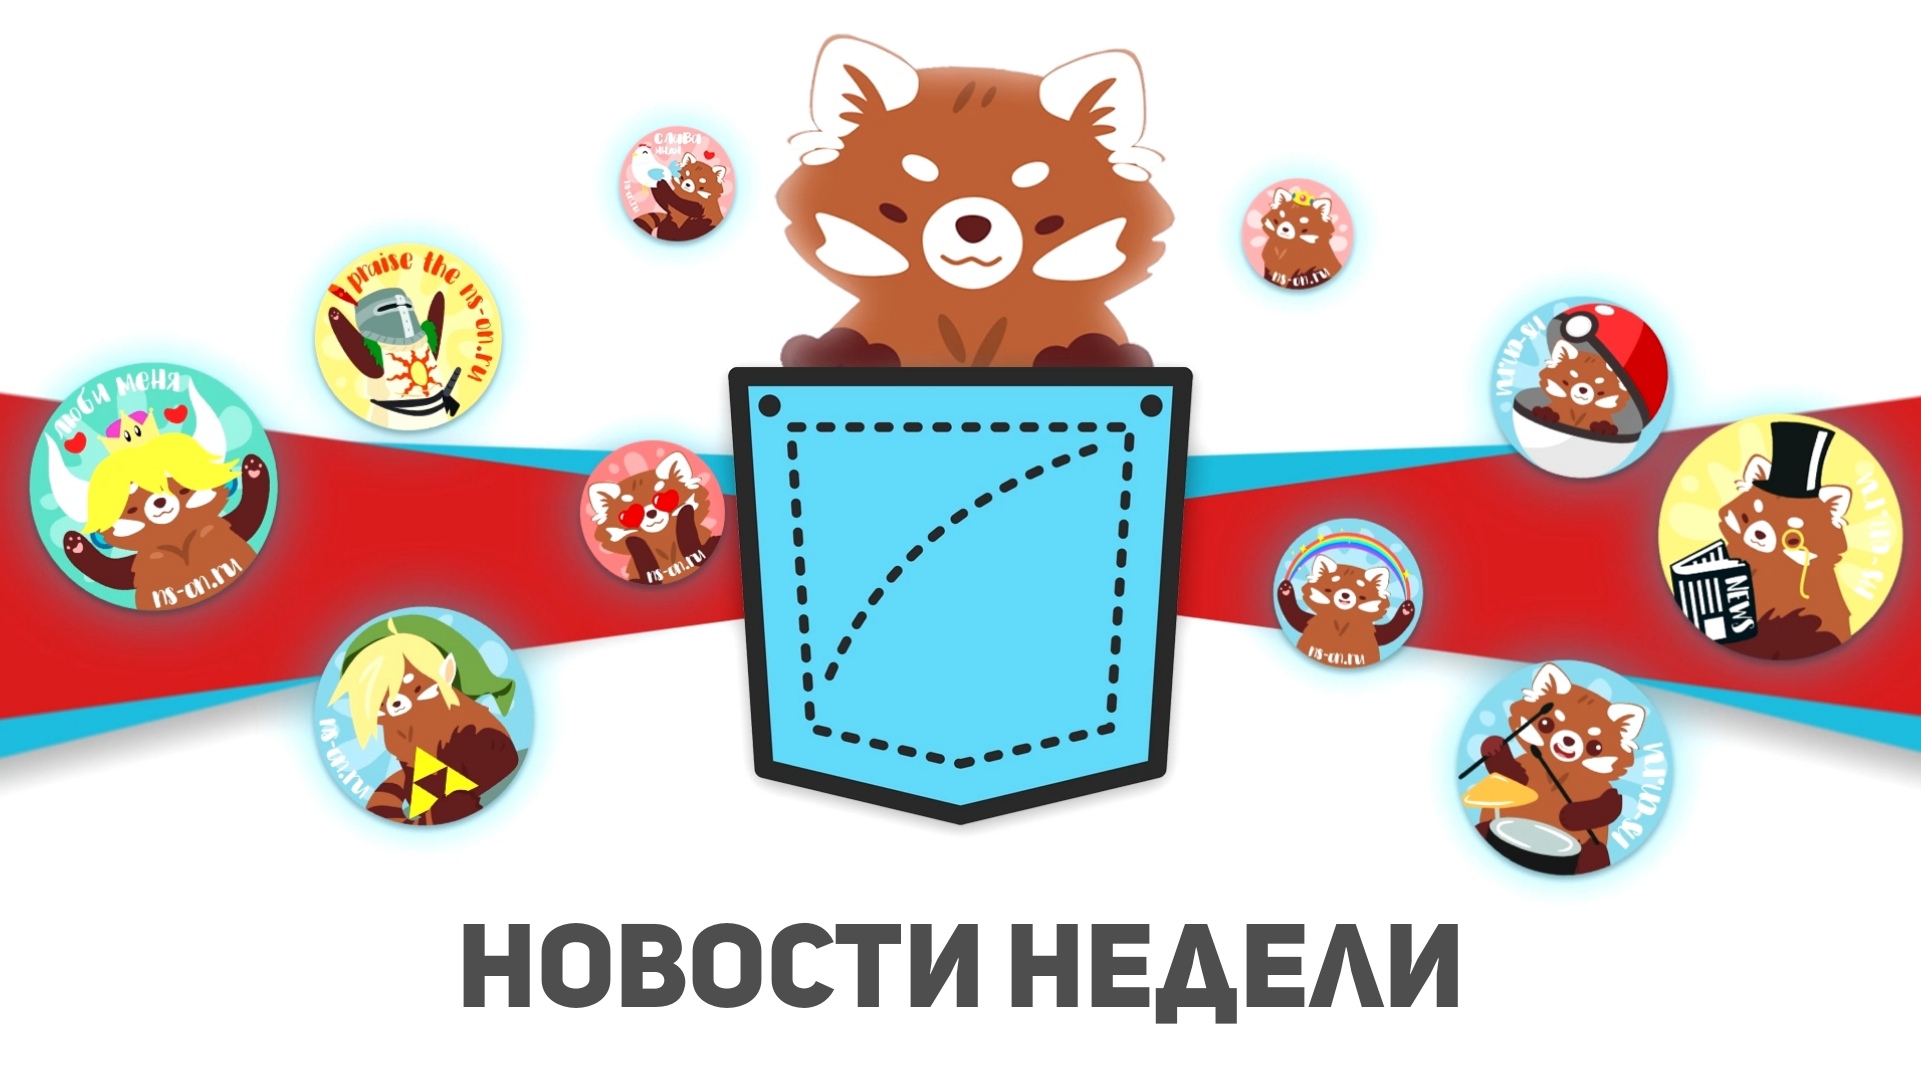 You are currently viewing Новости недели Nintendo Switch (14.02 – 20.02).